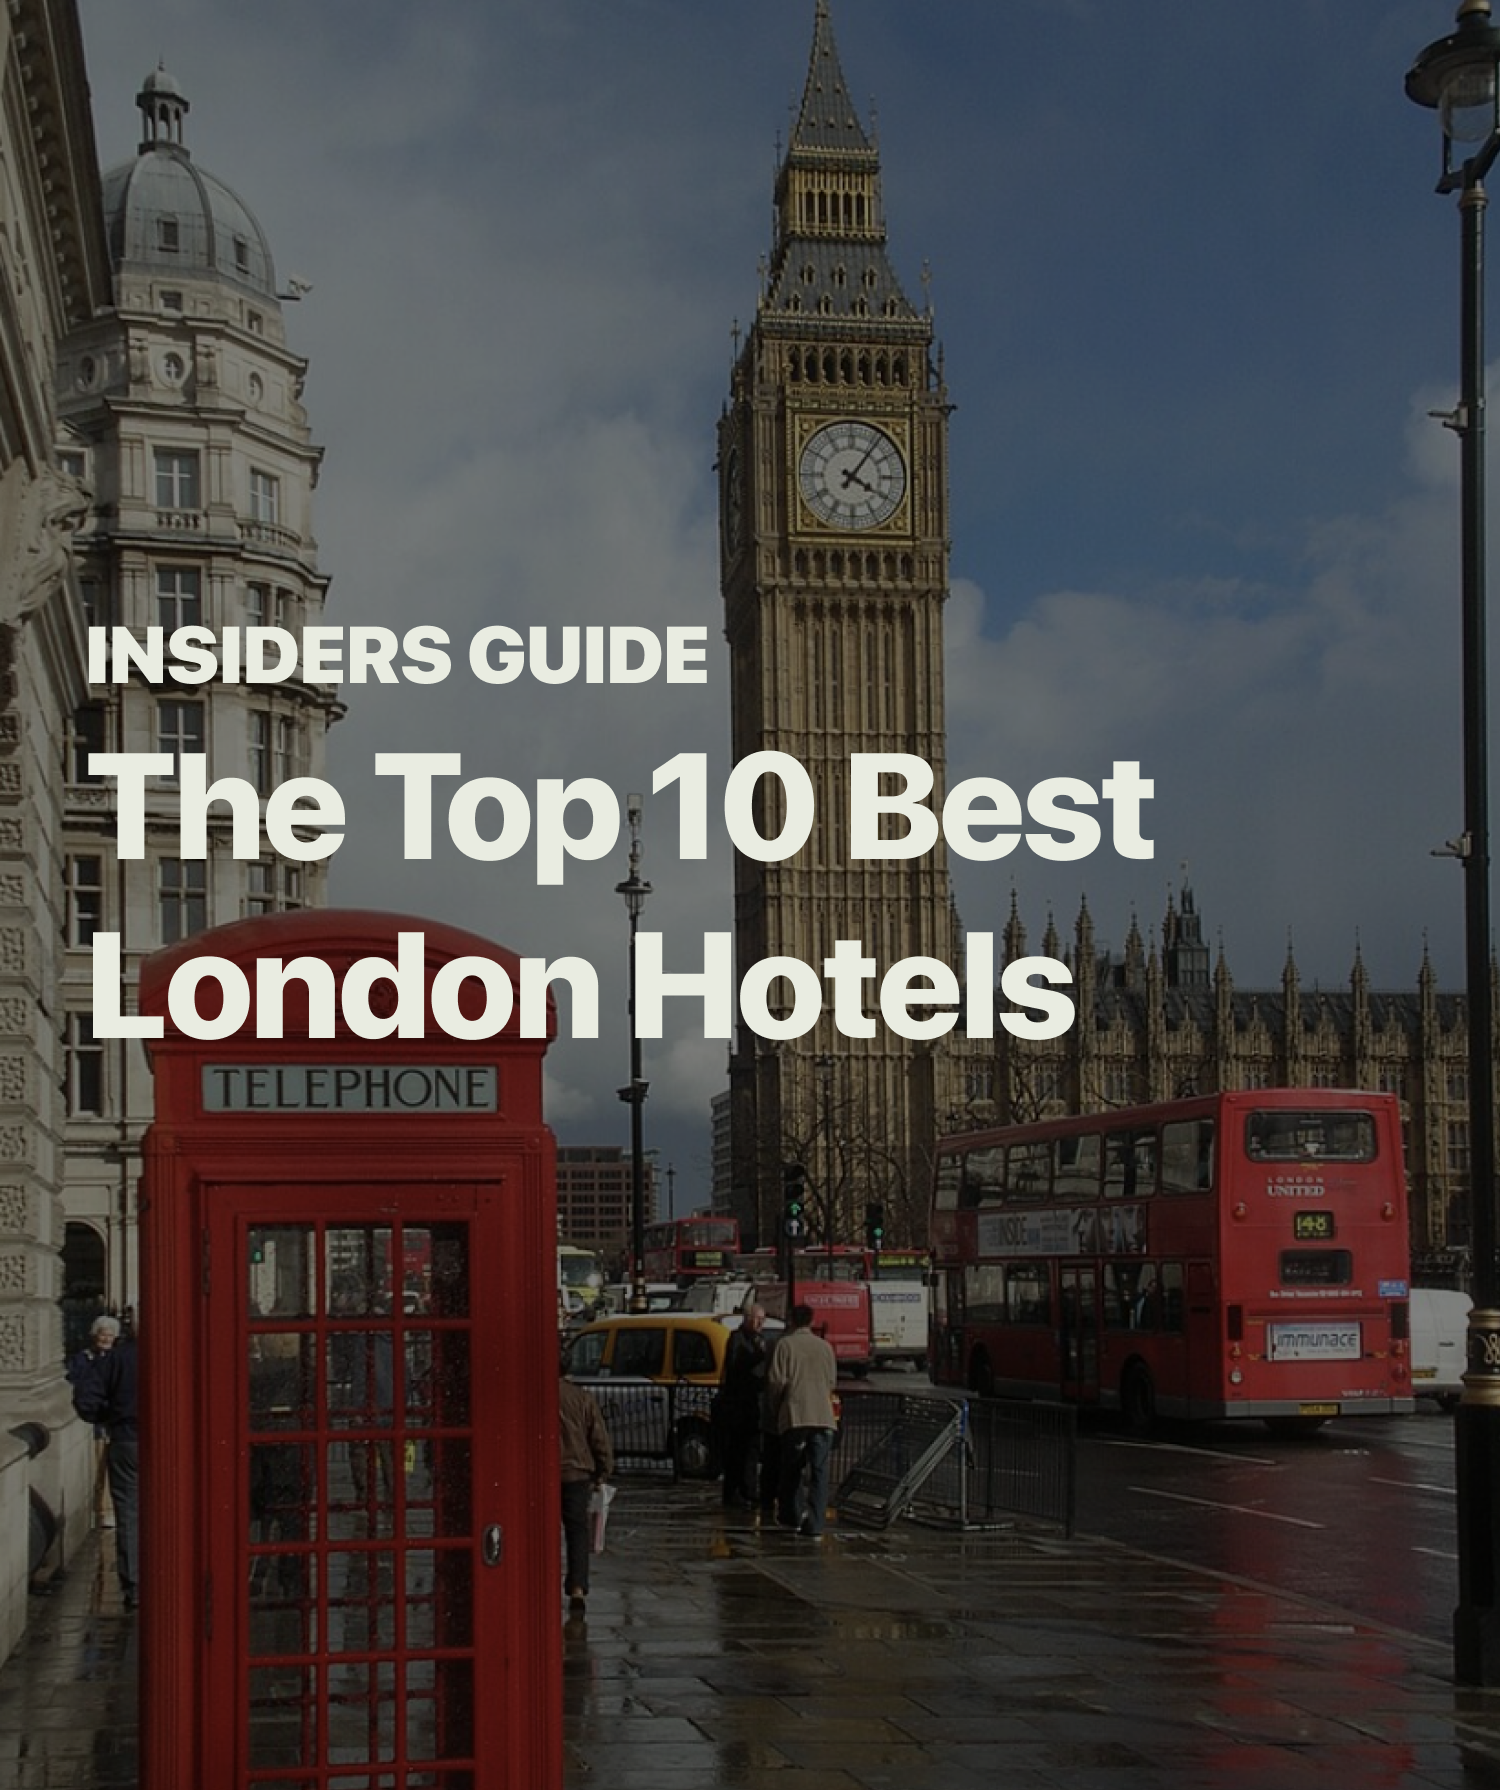 The Top 10 Best London Hotels